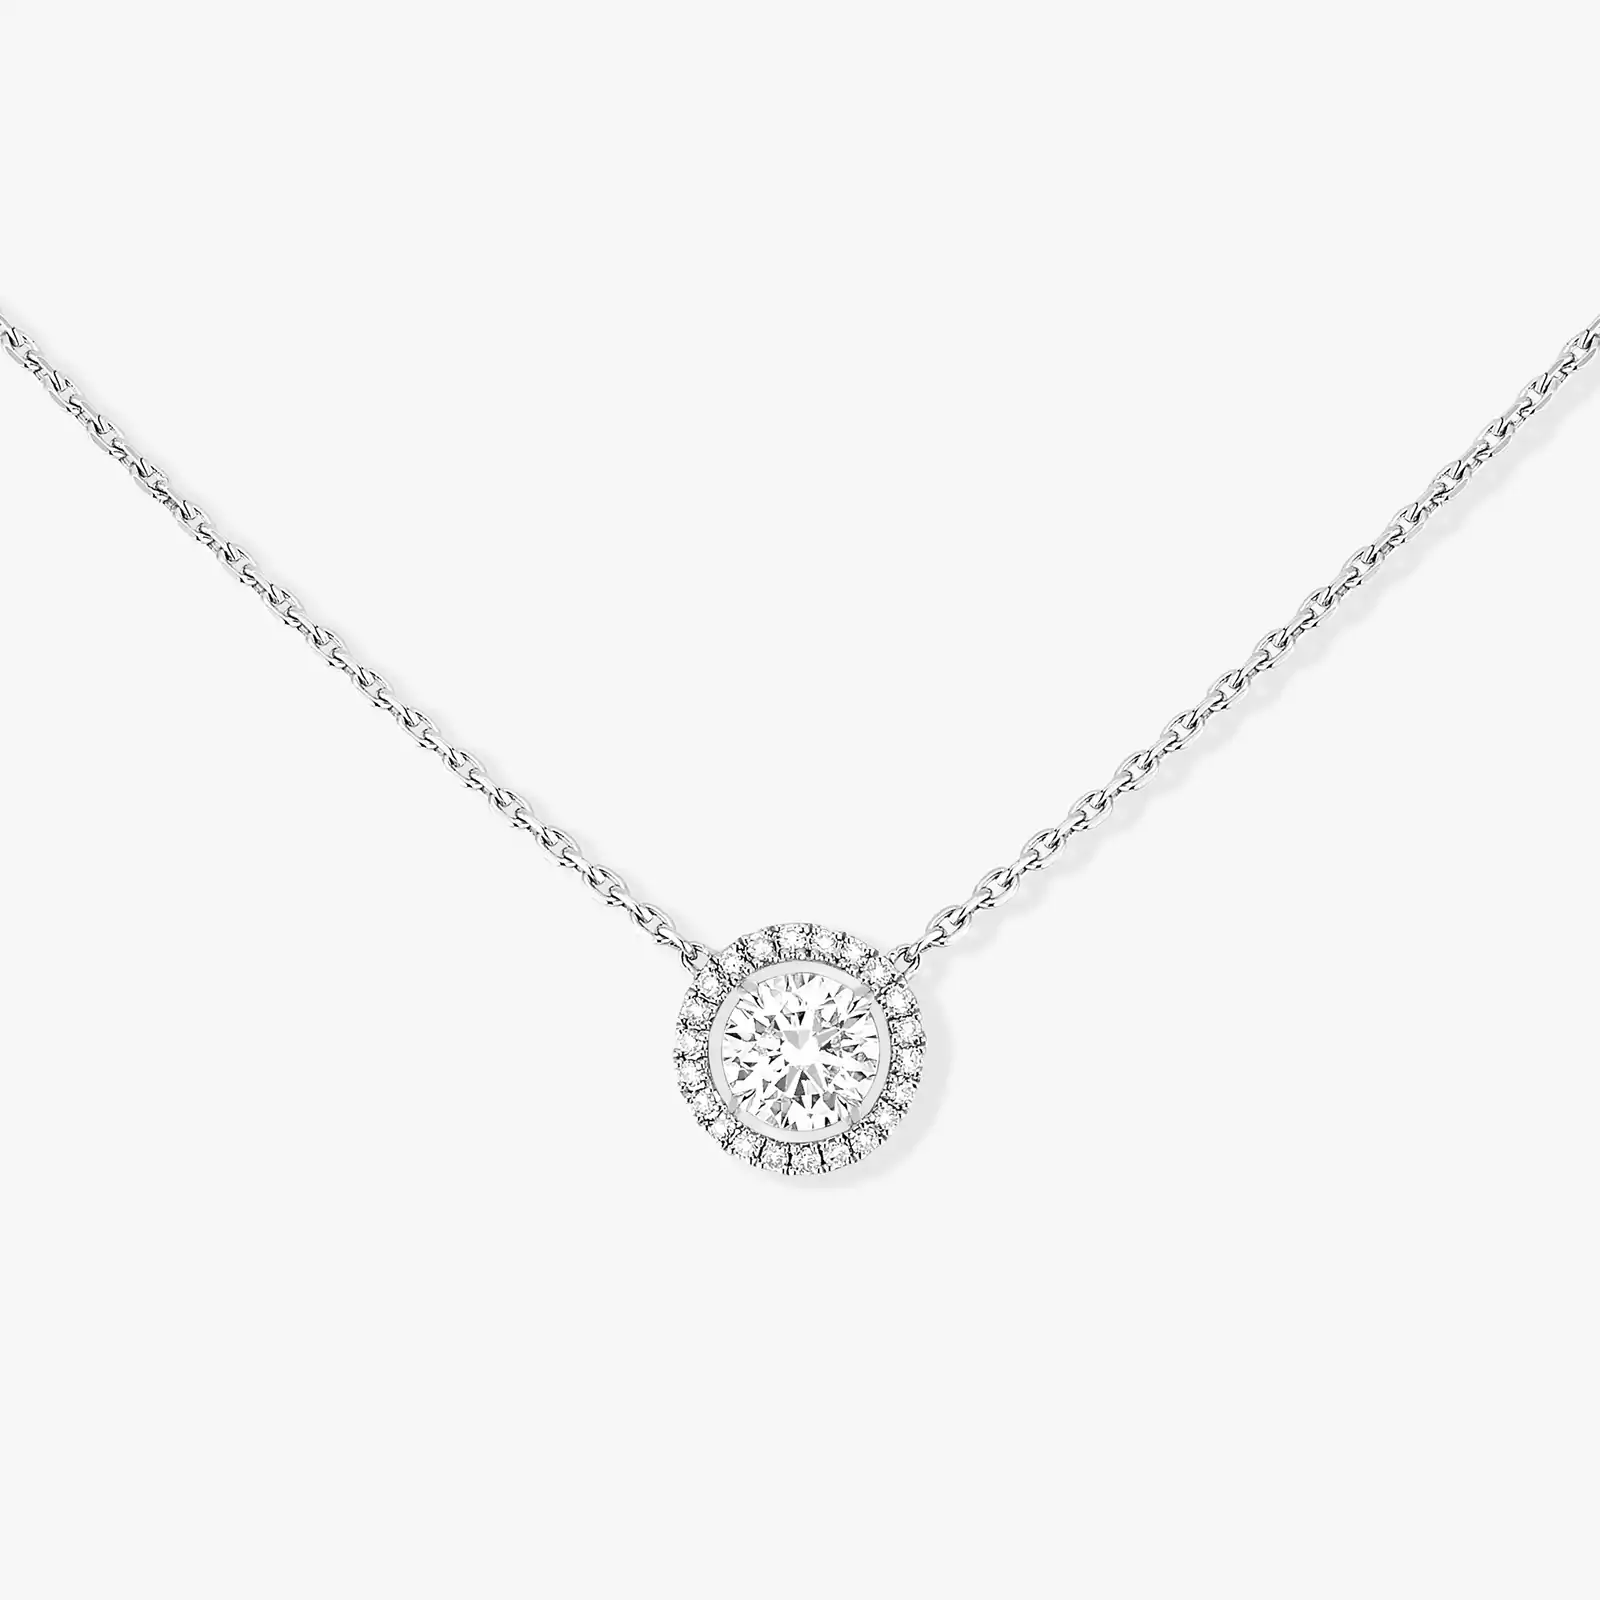 M-Love Solitaire Brilliant Cut  White Gold For Her Diamond Necklace 08611-WG